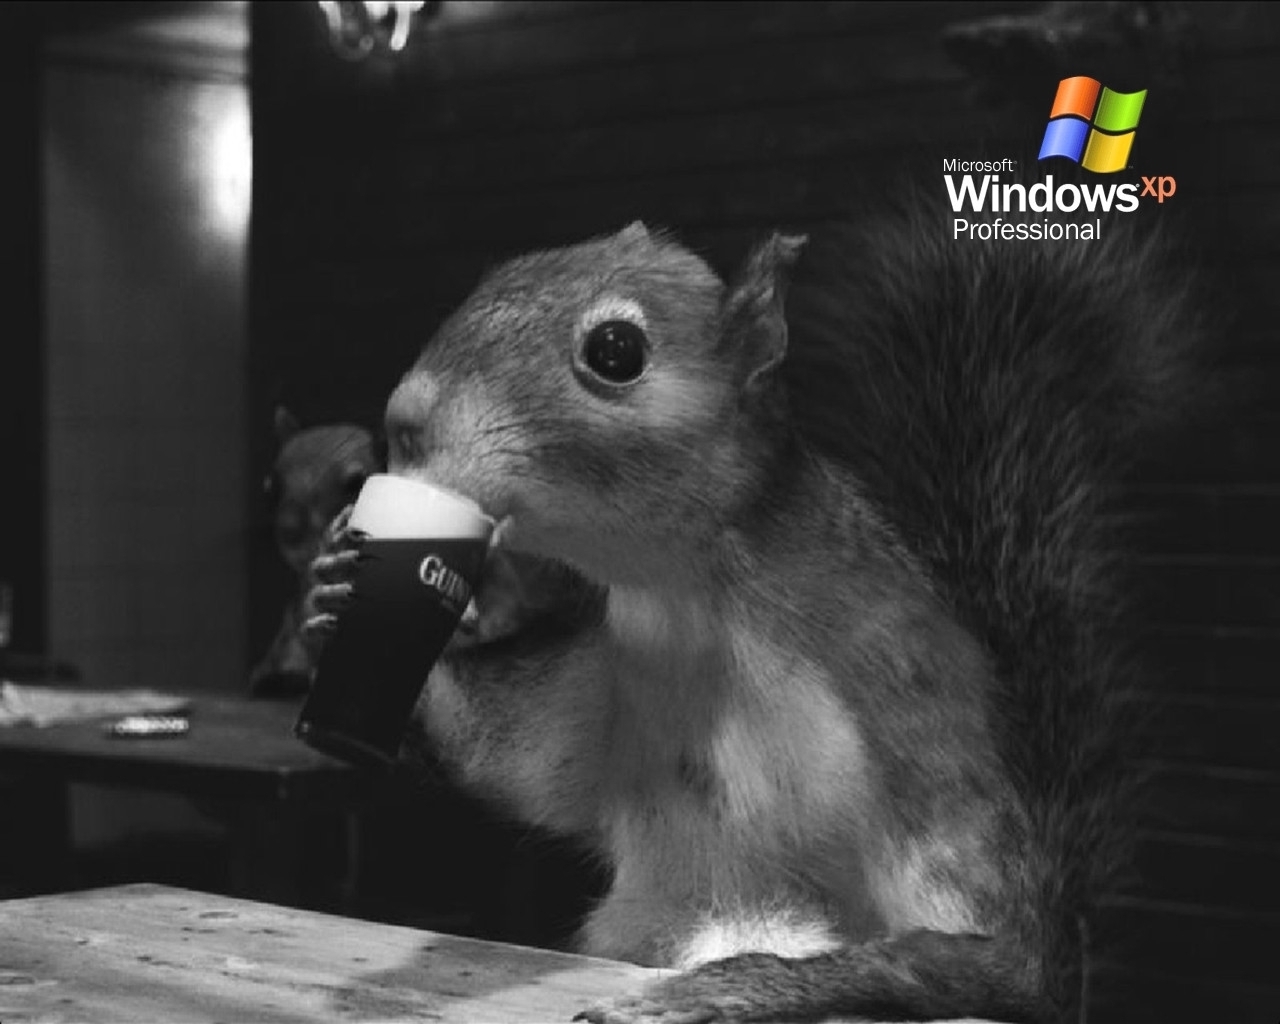 beer, funny, animals, squirrel, rodents, gray cellphone